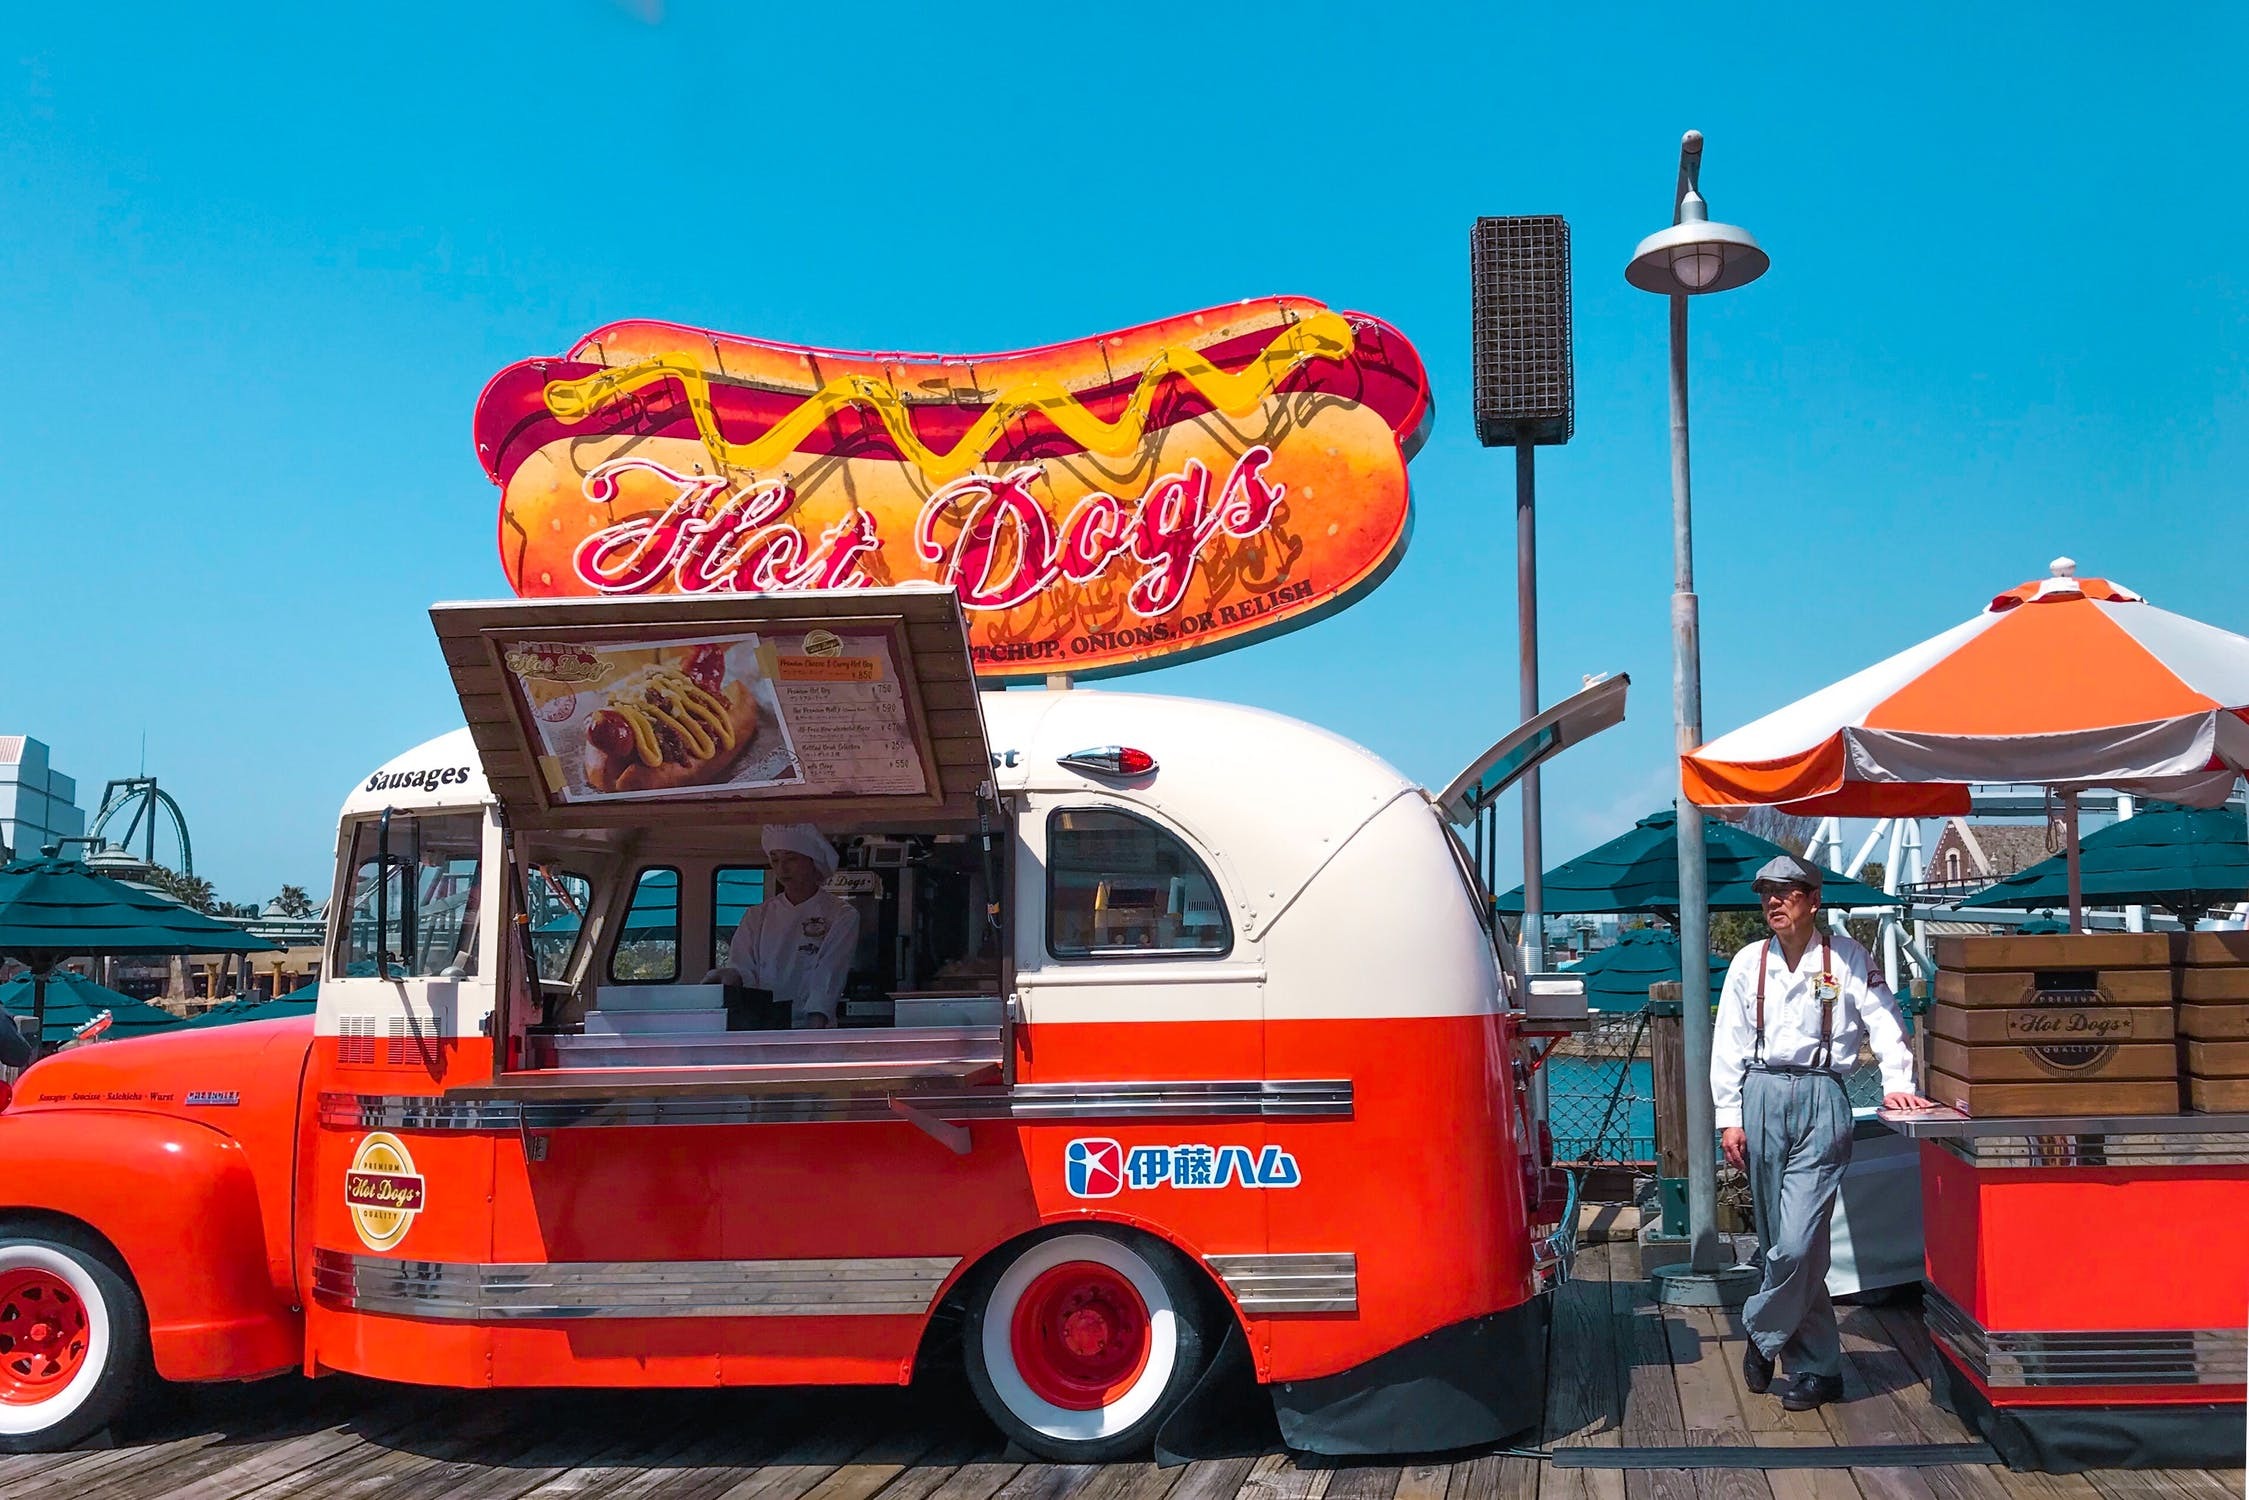 Food truck with hot dogs